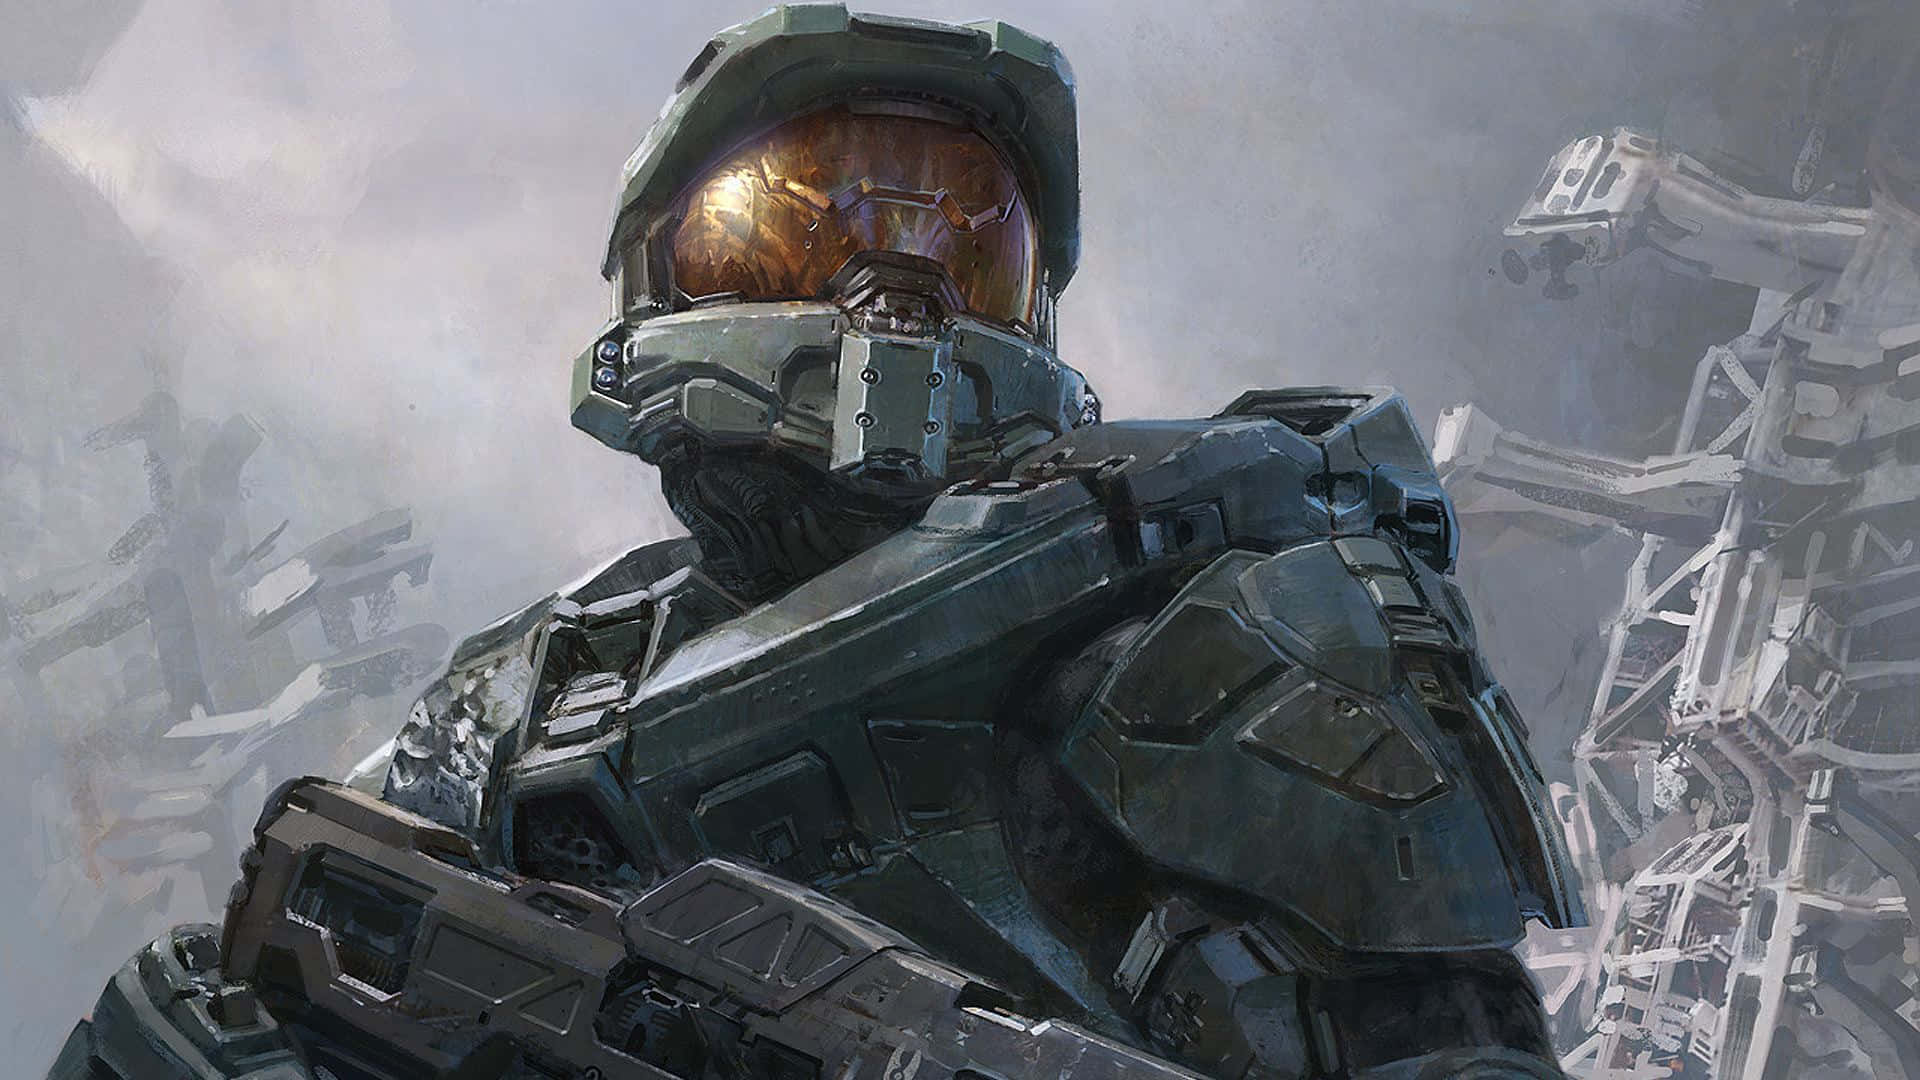 "Ready to face the fight - a Spartan soldier in Microsoft's unique Halo universe"